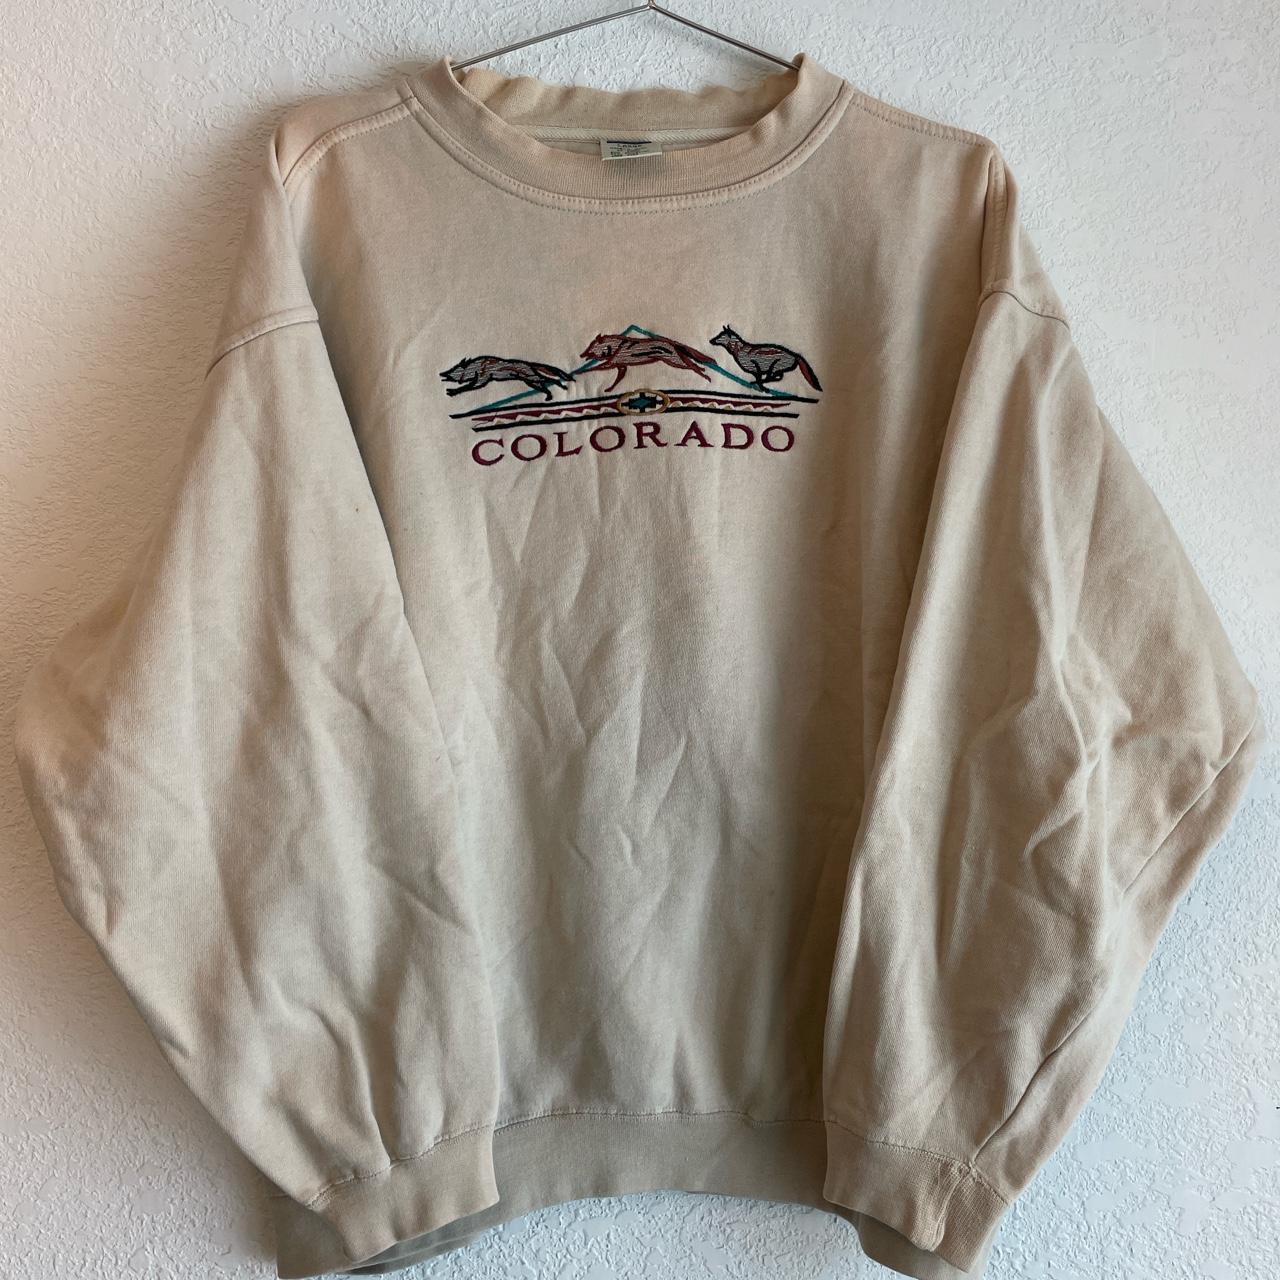 Colorado crew Some stains shown in photos... - Depop